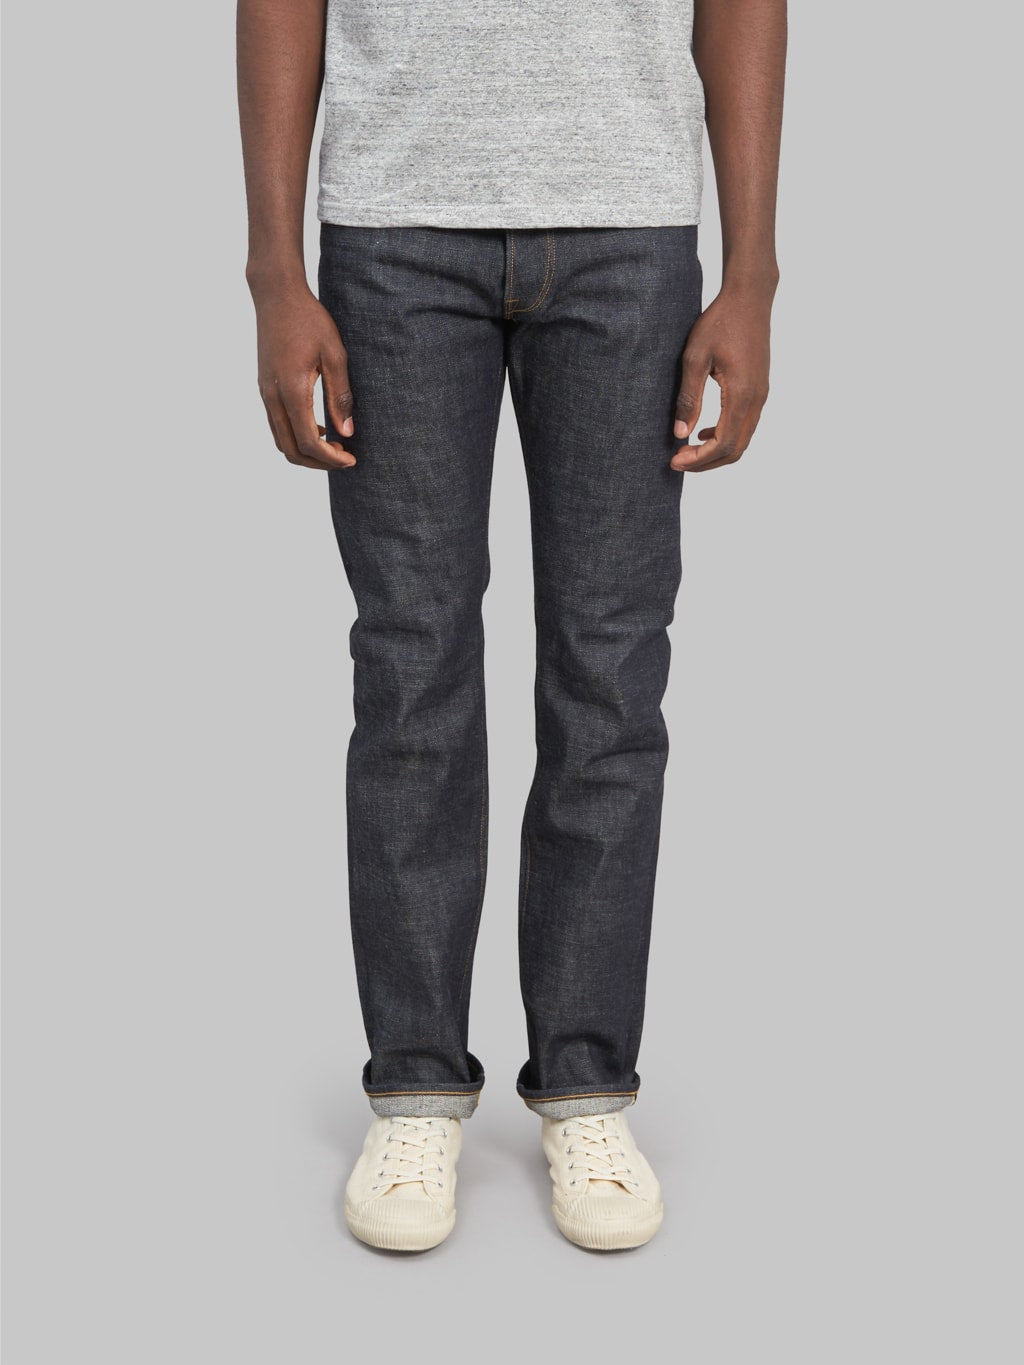 Stevenson Overall Big Sur 210 slim tapered jeans fron fit